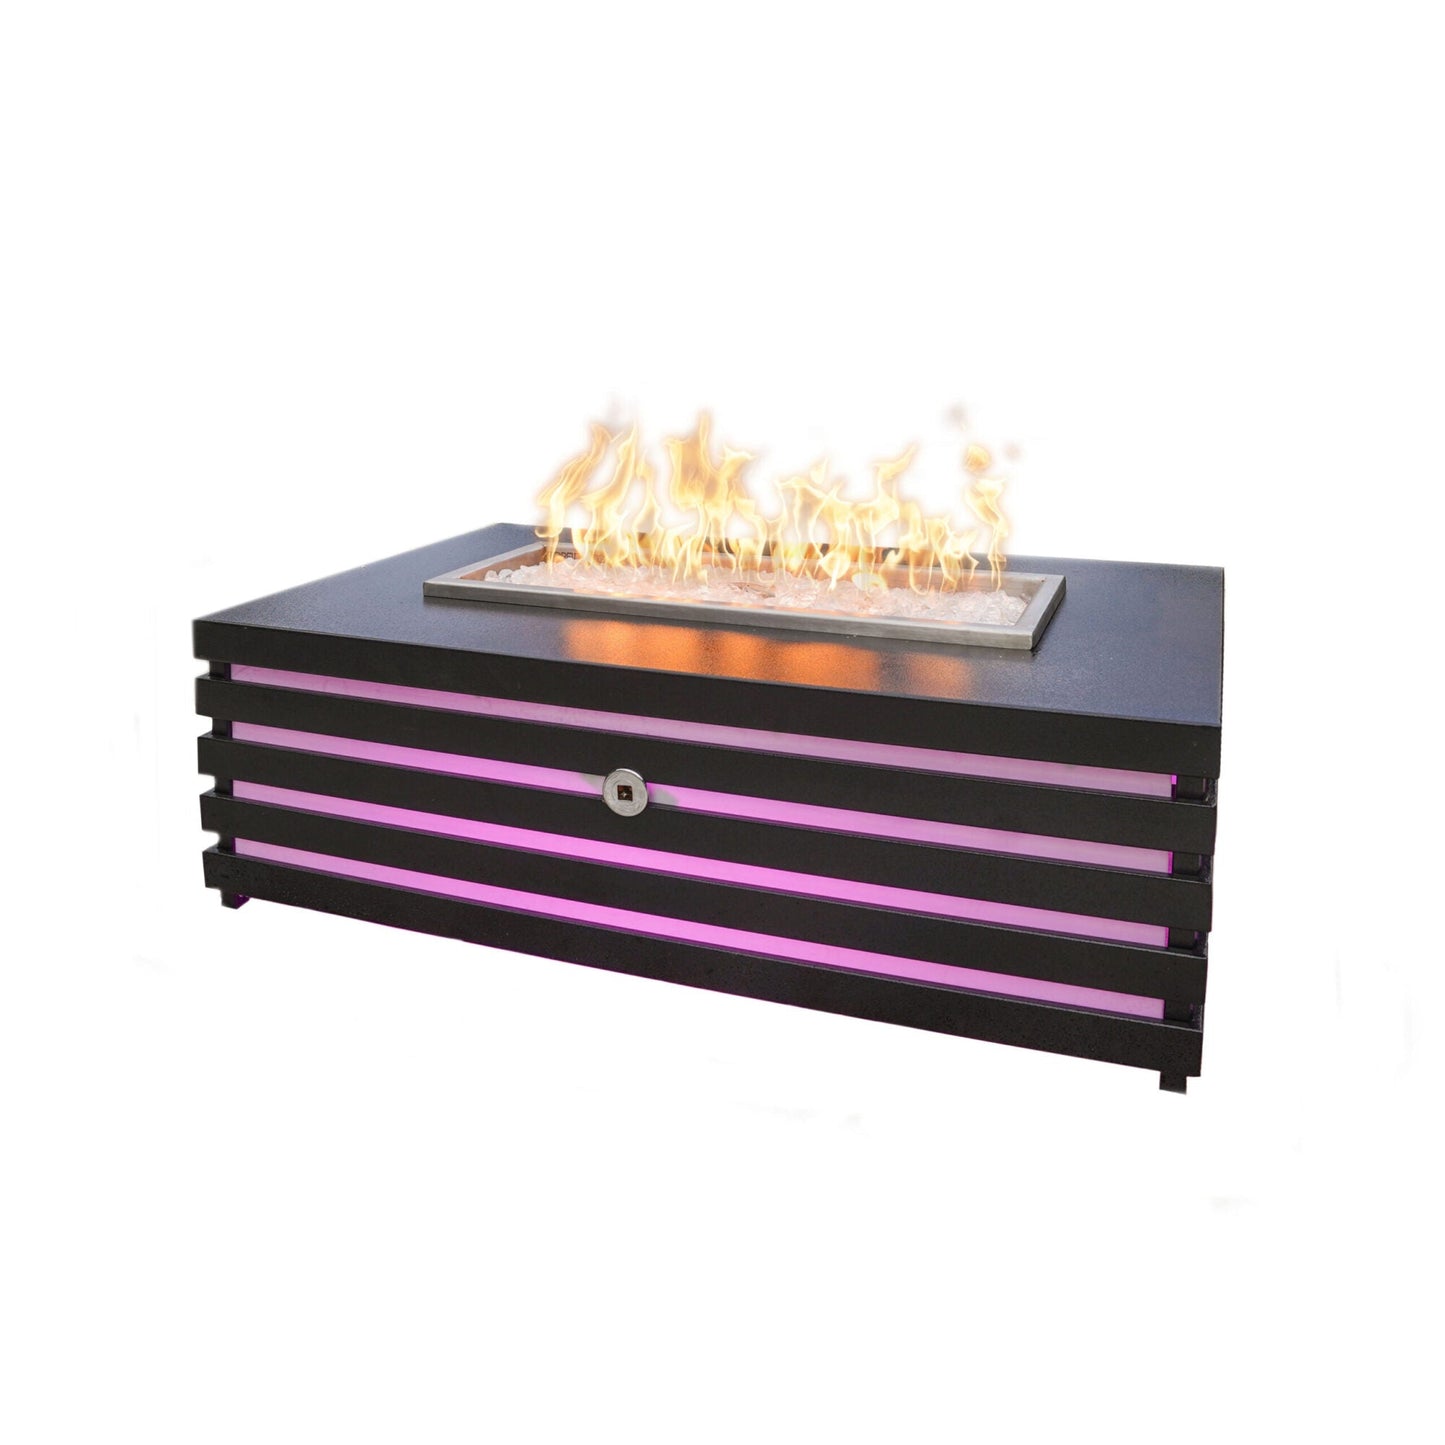 The Outdoor Plus Amina 60" Black Powder Coated Natural Gas Fire Pit with 110V Electronic Ignition